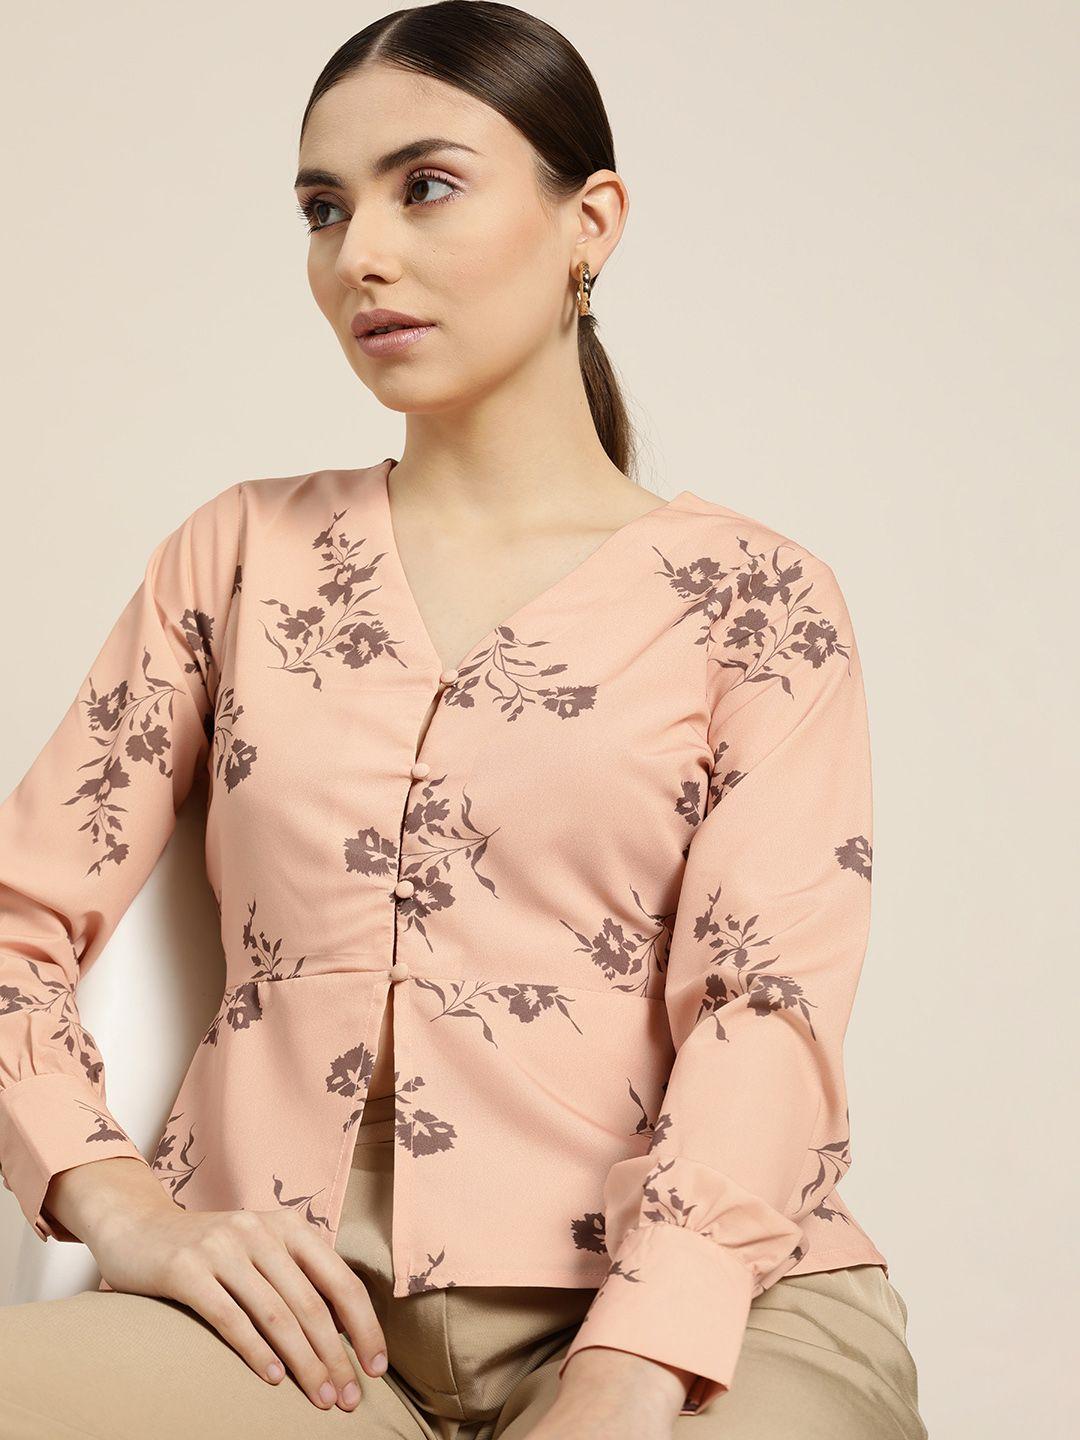 her by invictus peach-coloured & olive green floral print top